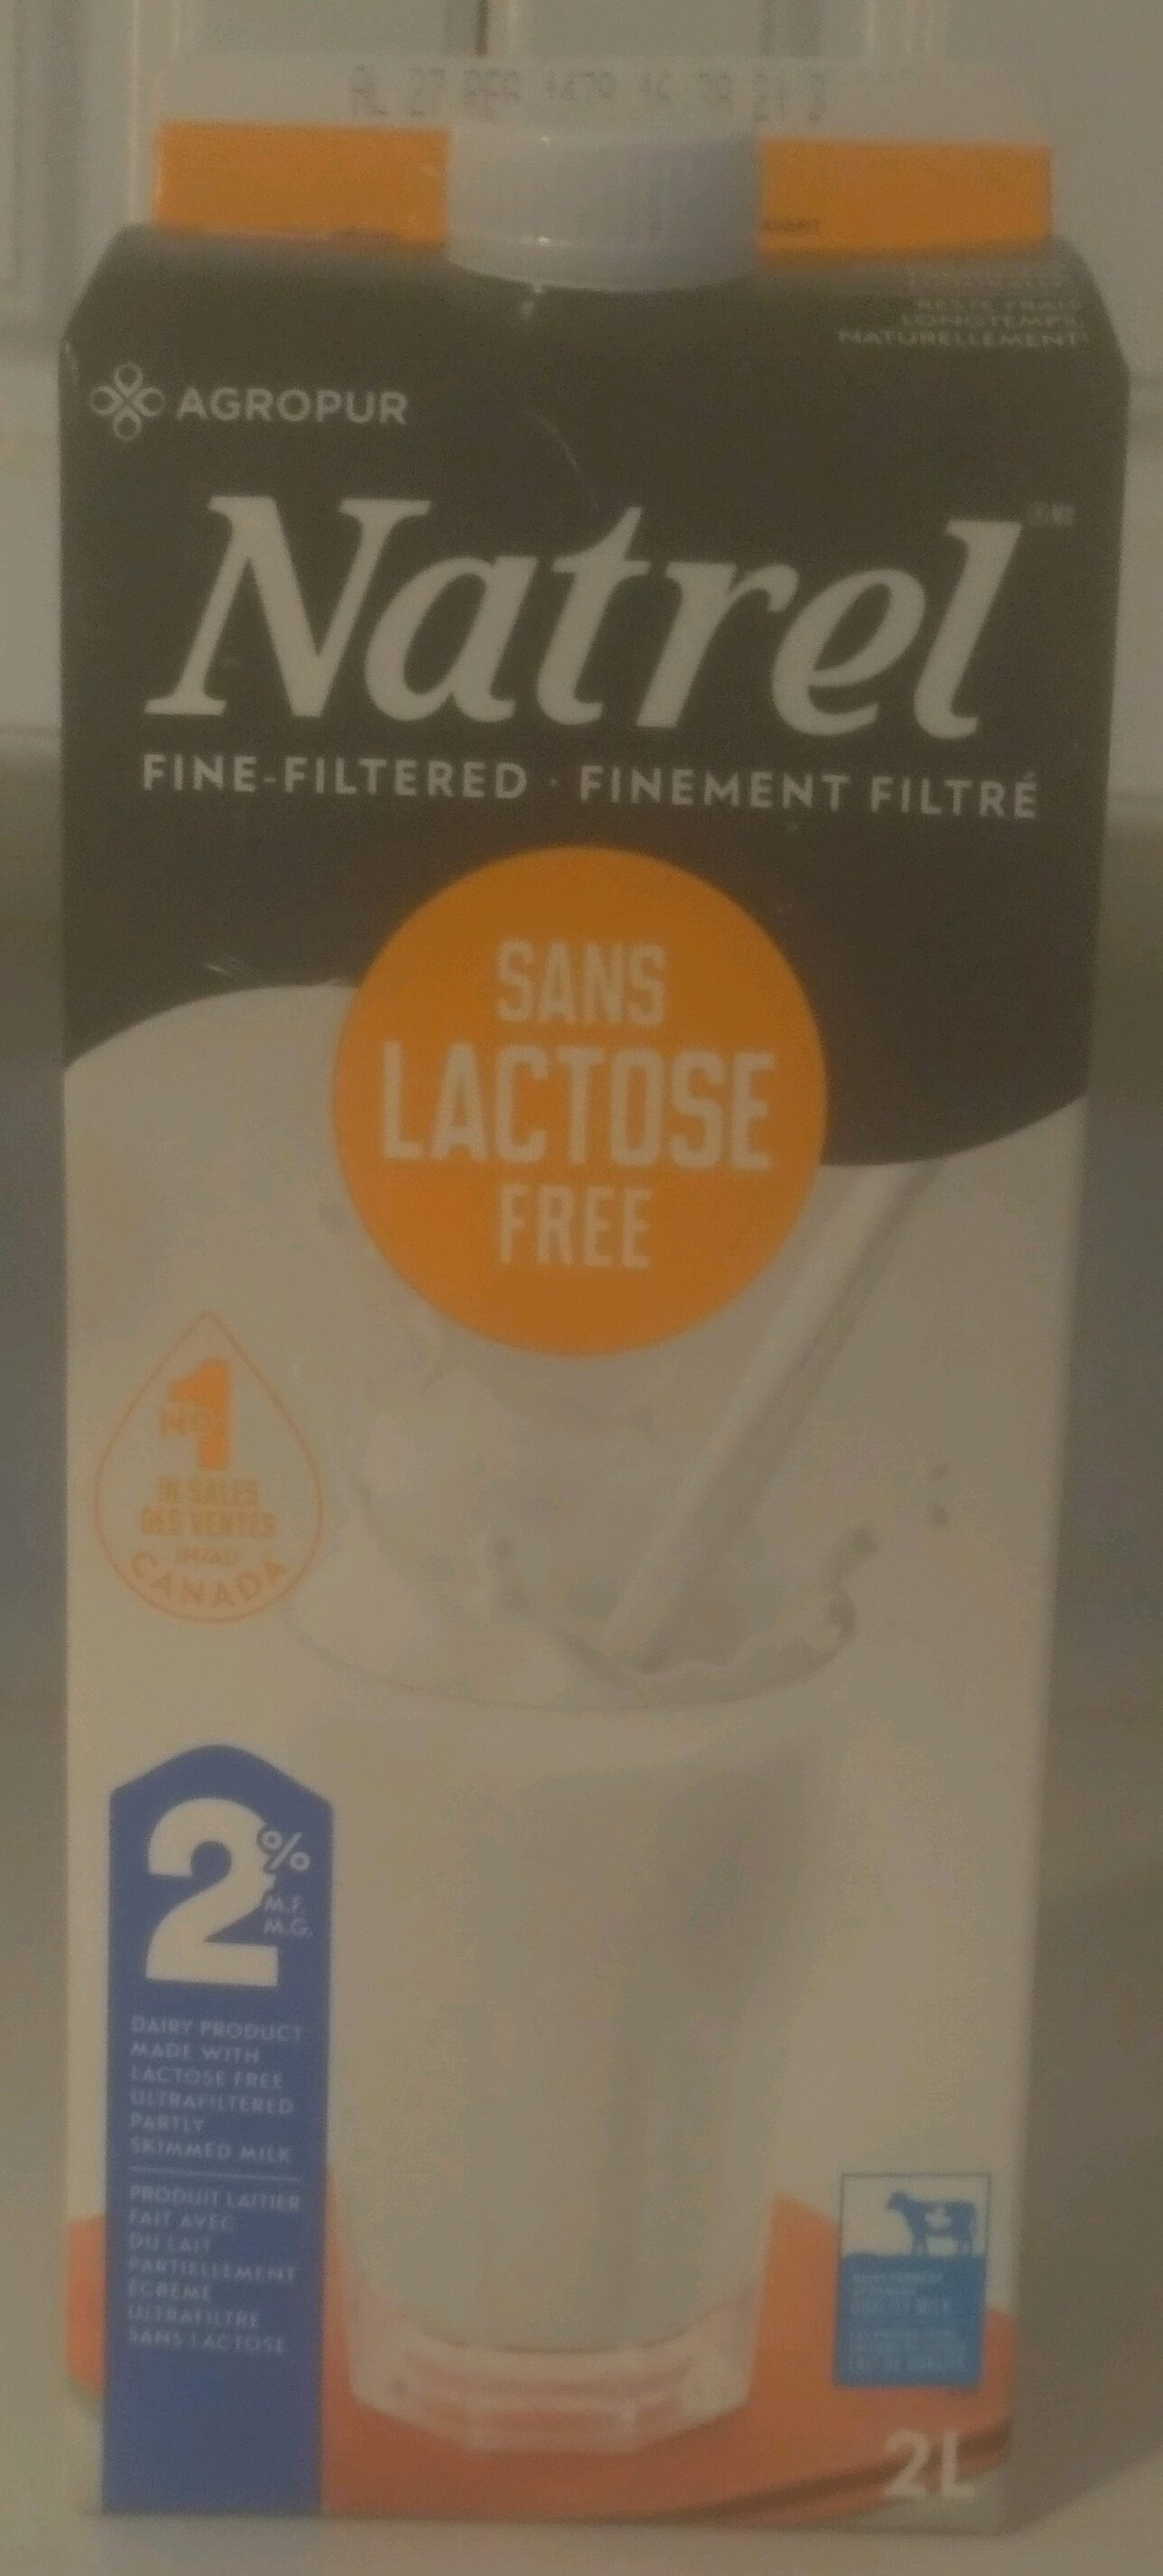 Fine-Filtered Lactose Free 2% Milk - Product